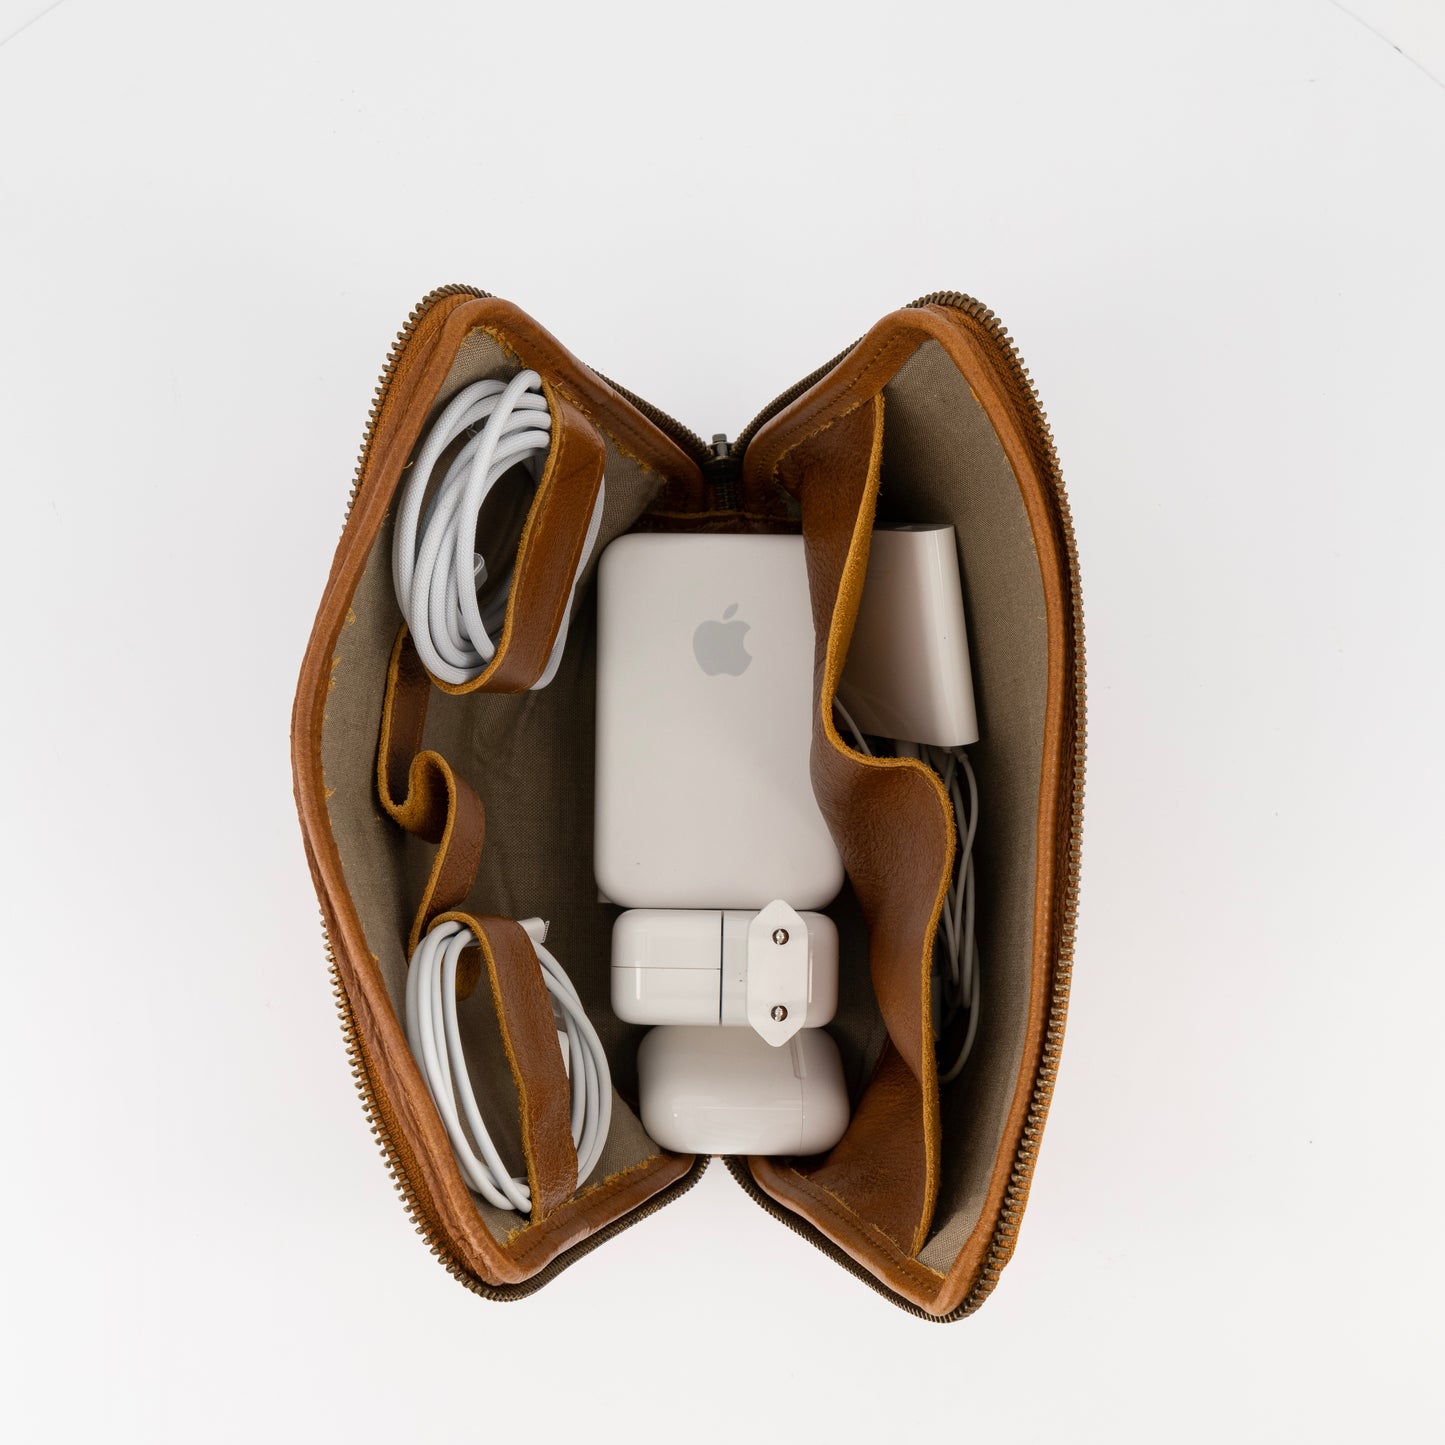 Leather Cable Organizer Bag